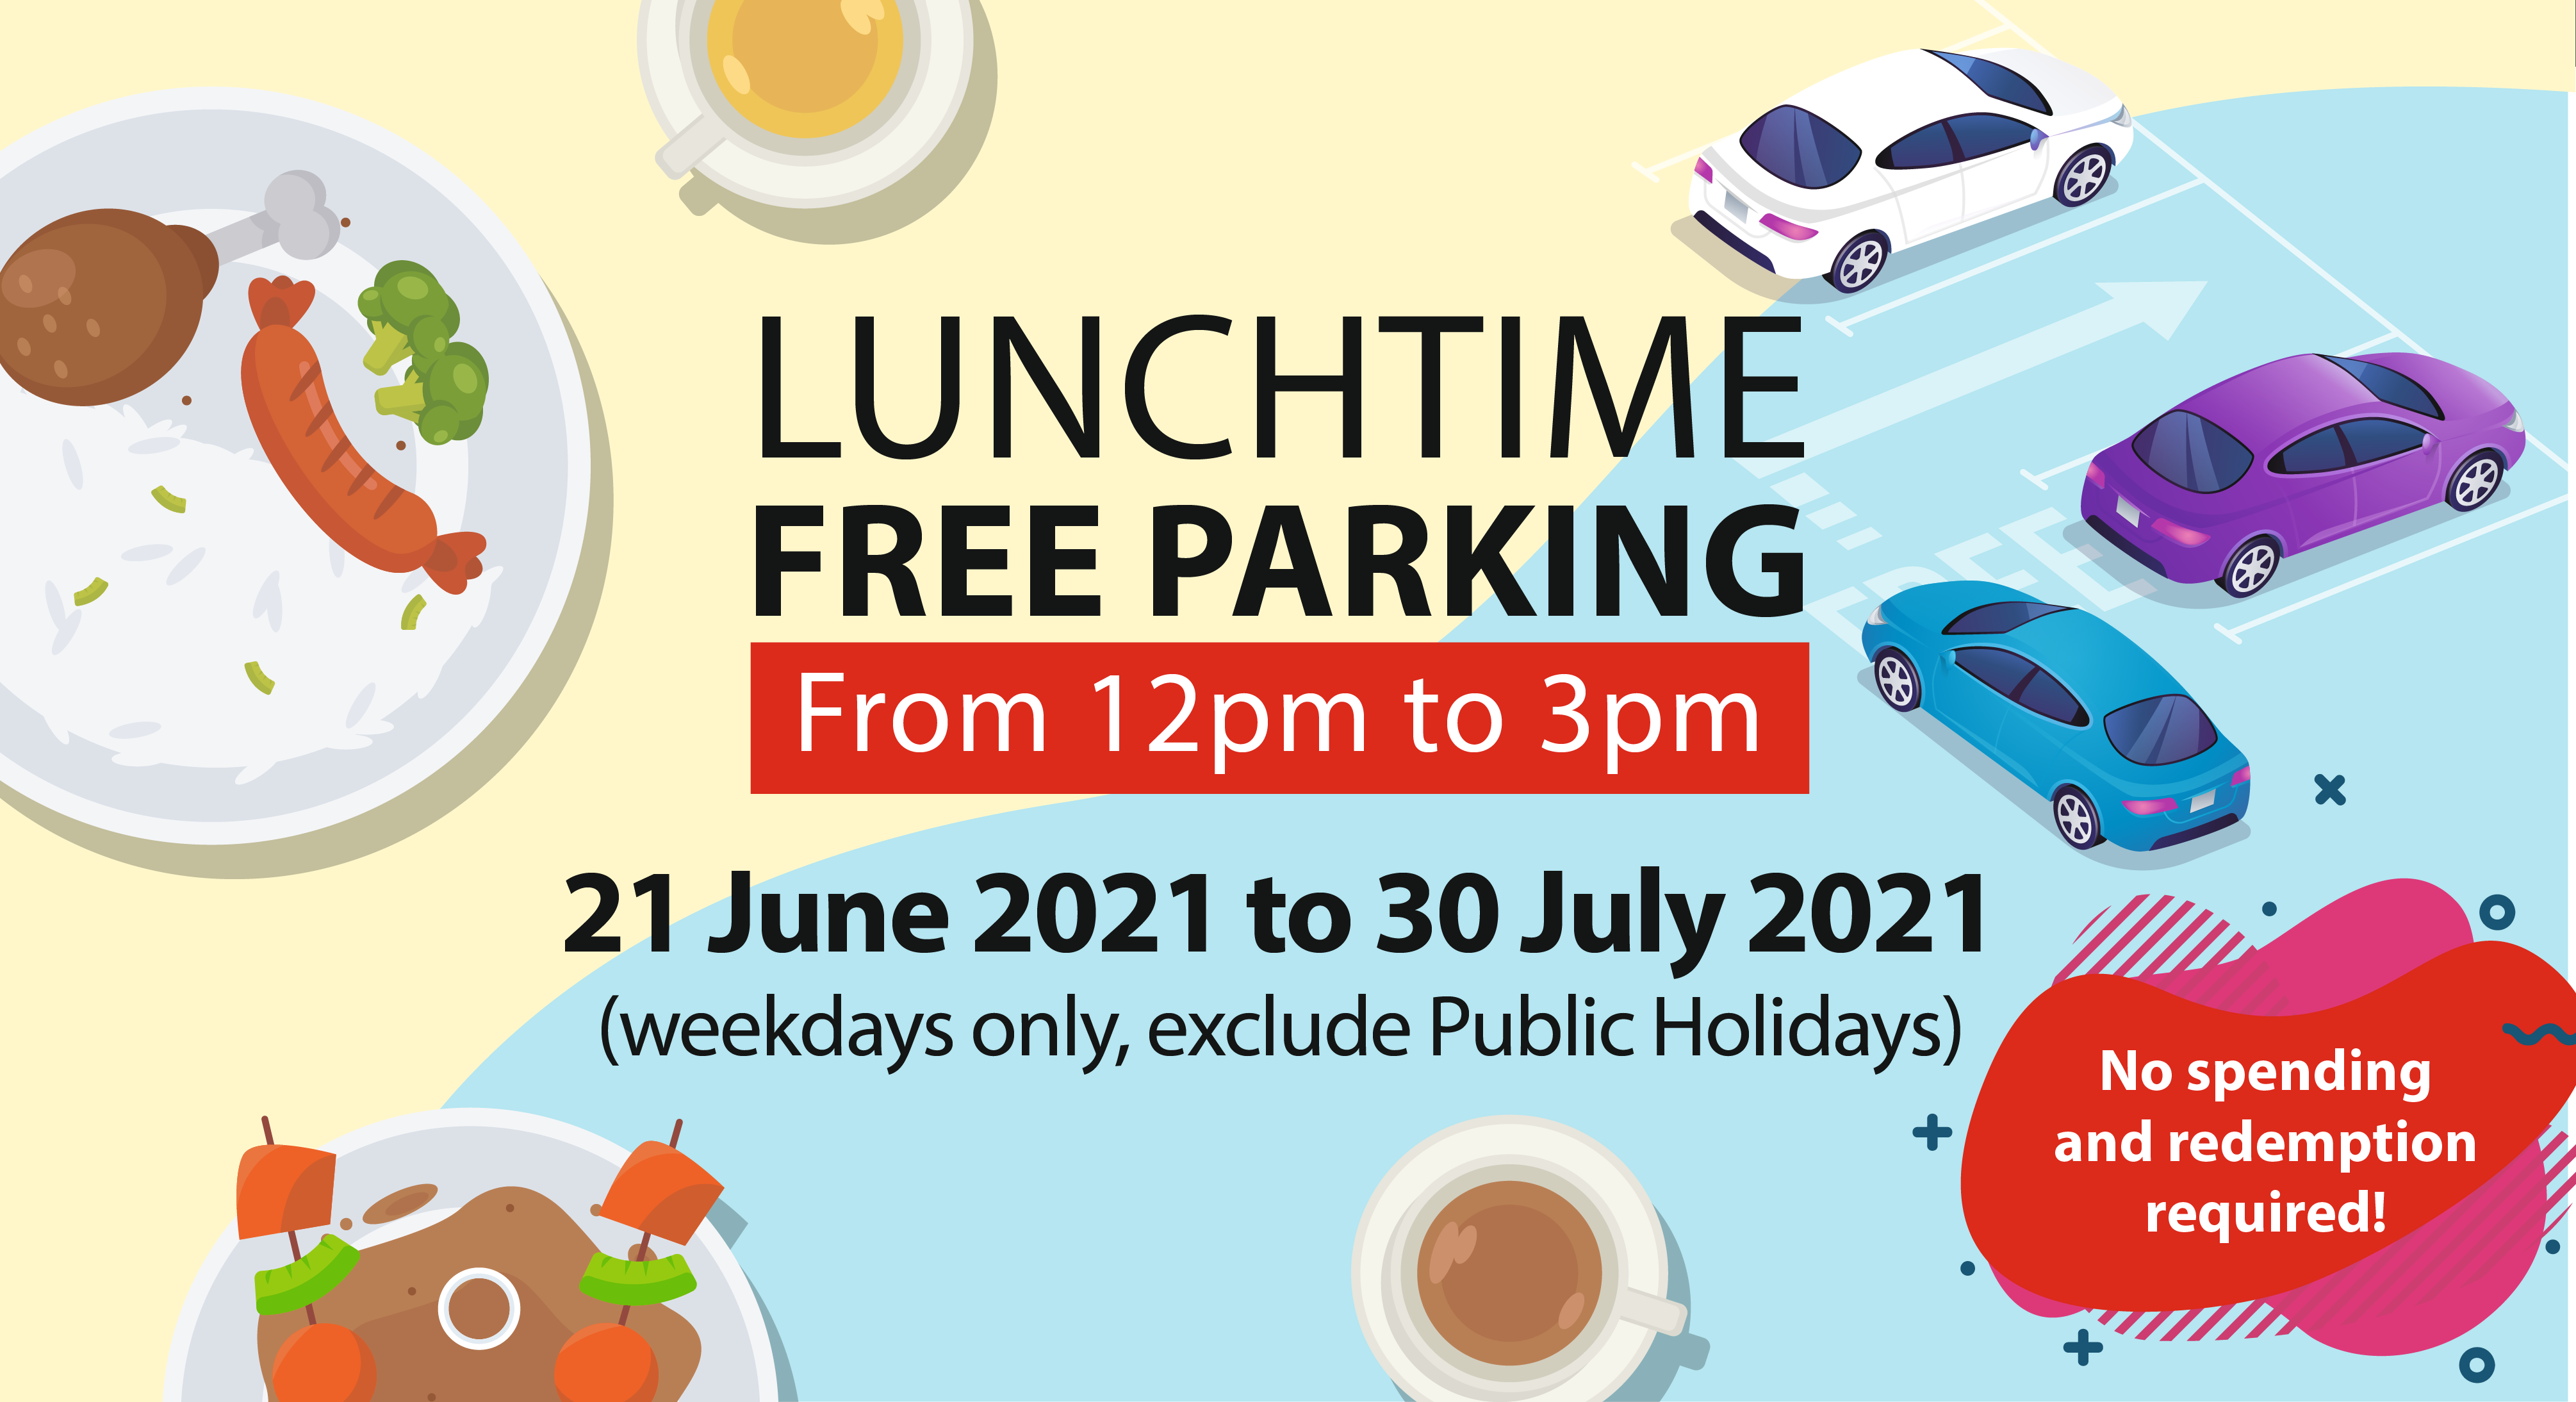 Motorists can park for free at SAFRA Jurong from 12pm - 3pm till 30 July 2021